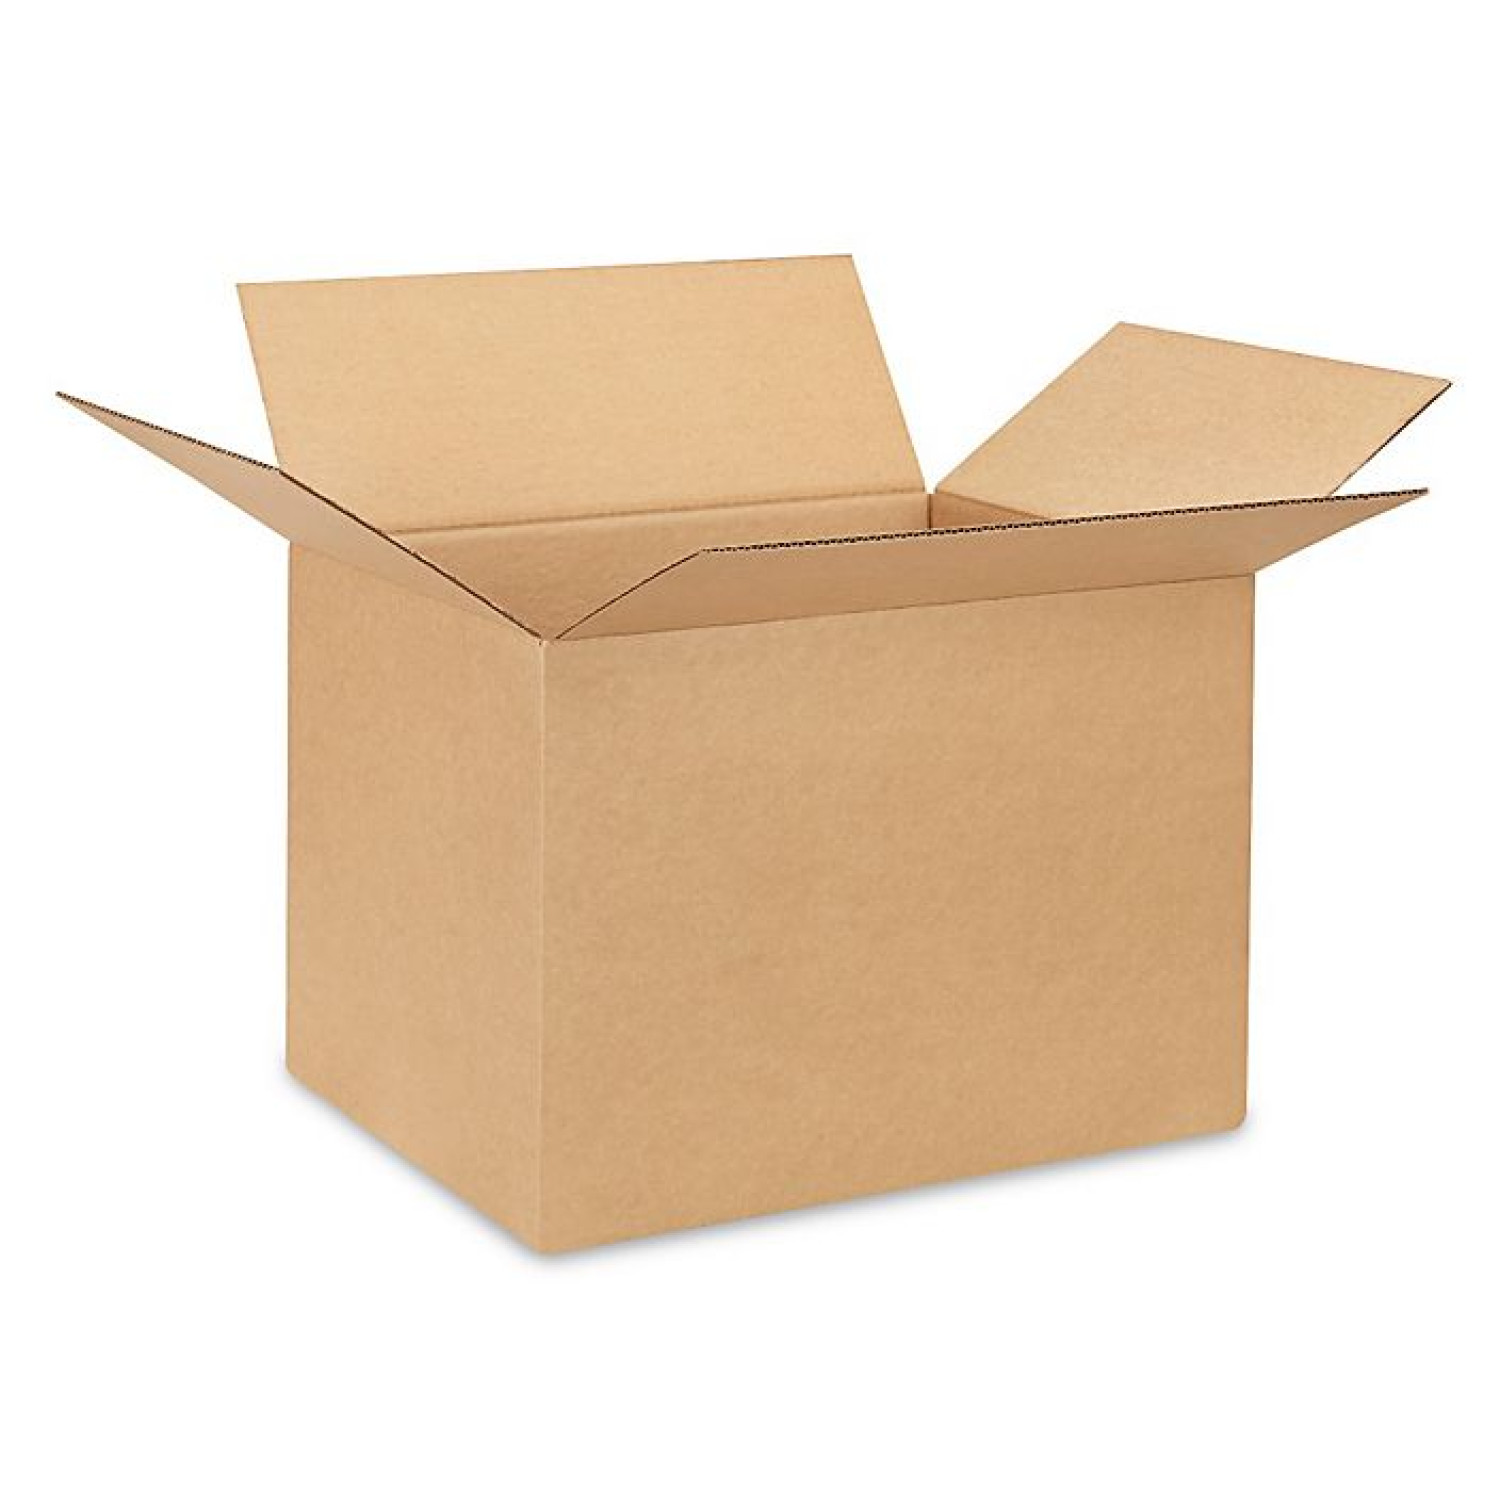 Strong Cardboard Picture Boxes - Multiple Sizes Available or Custom Made  Picture Boxes.